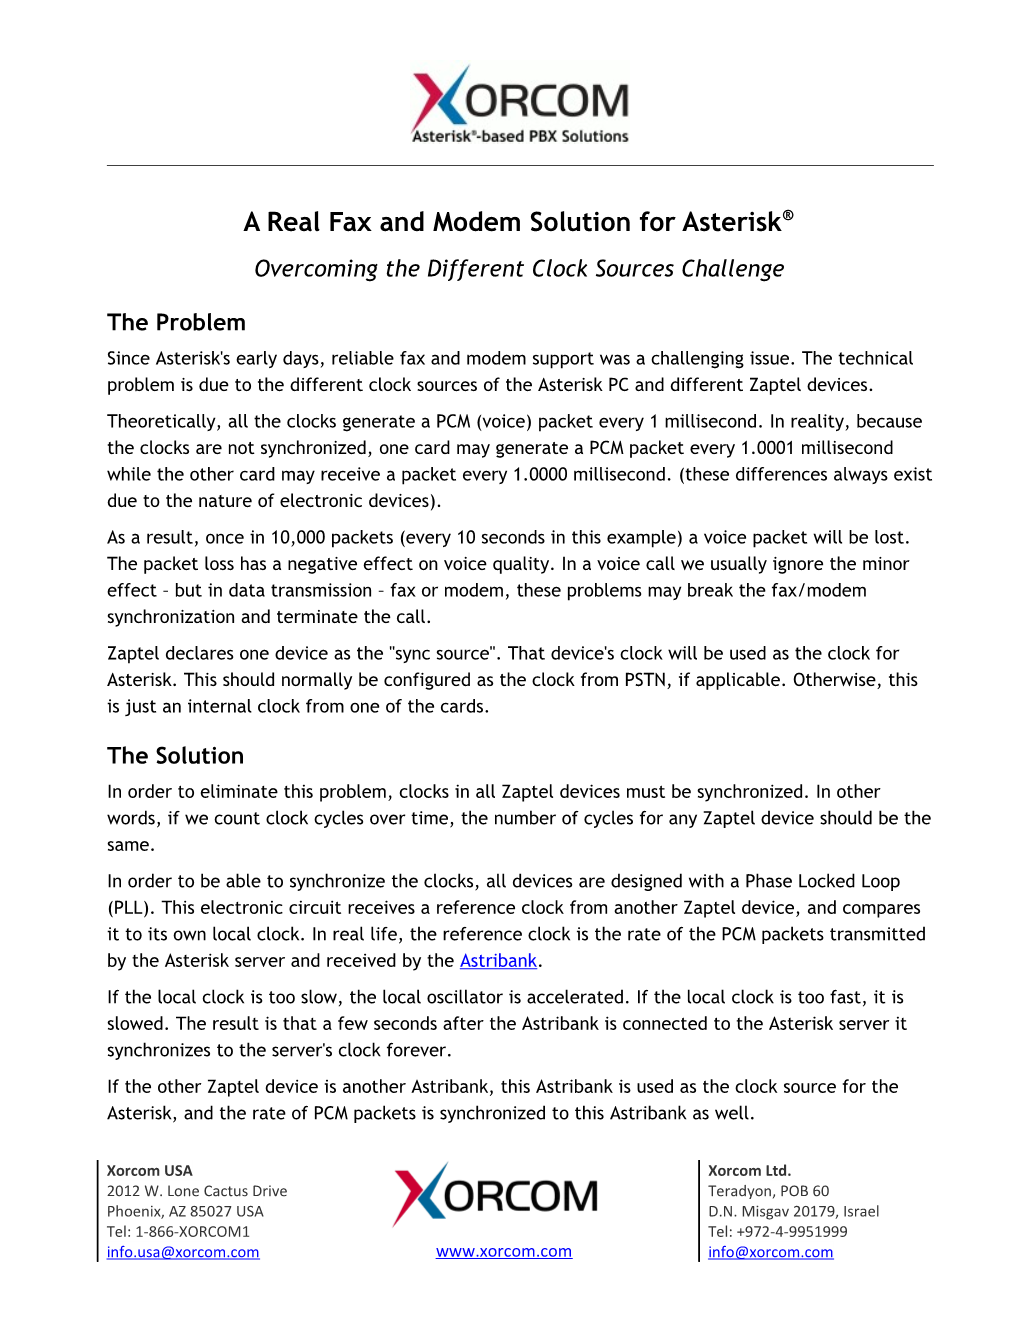 A Real Fax and Modem Solution for Asterisk Page 1 of 3